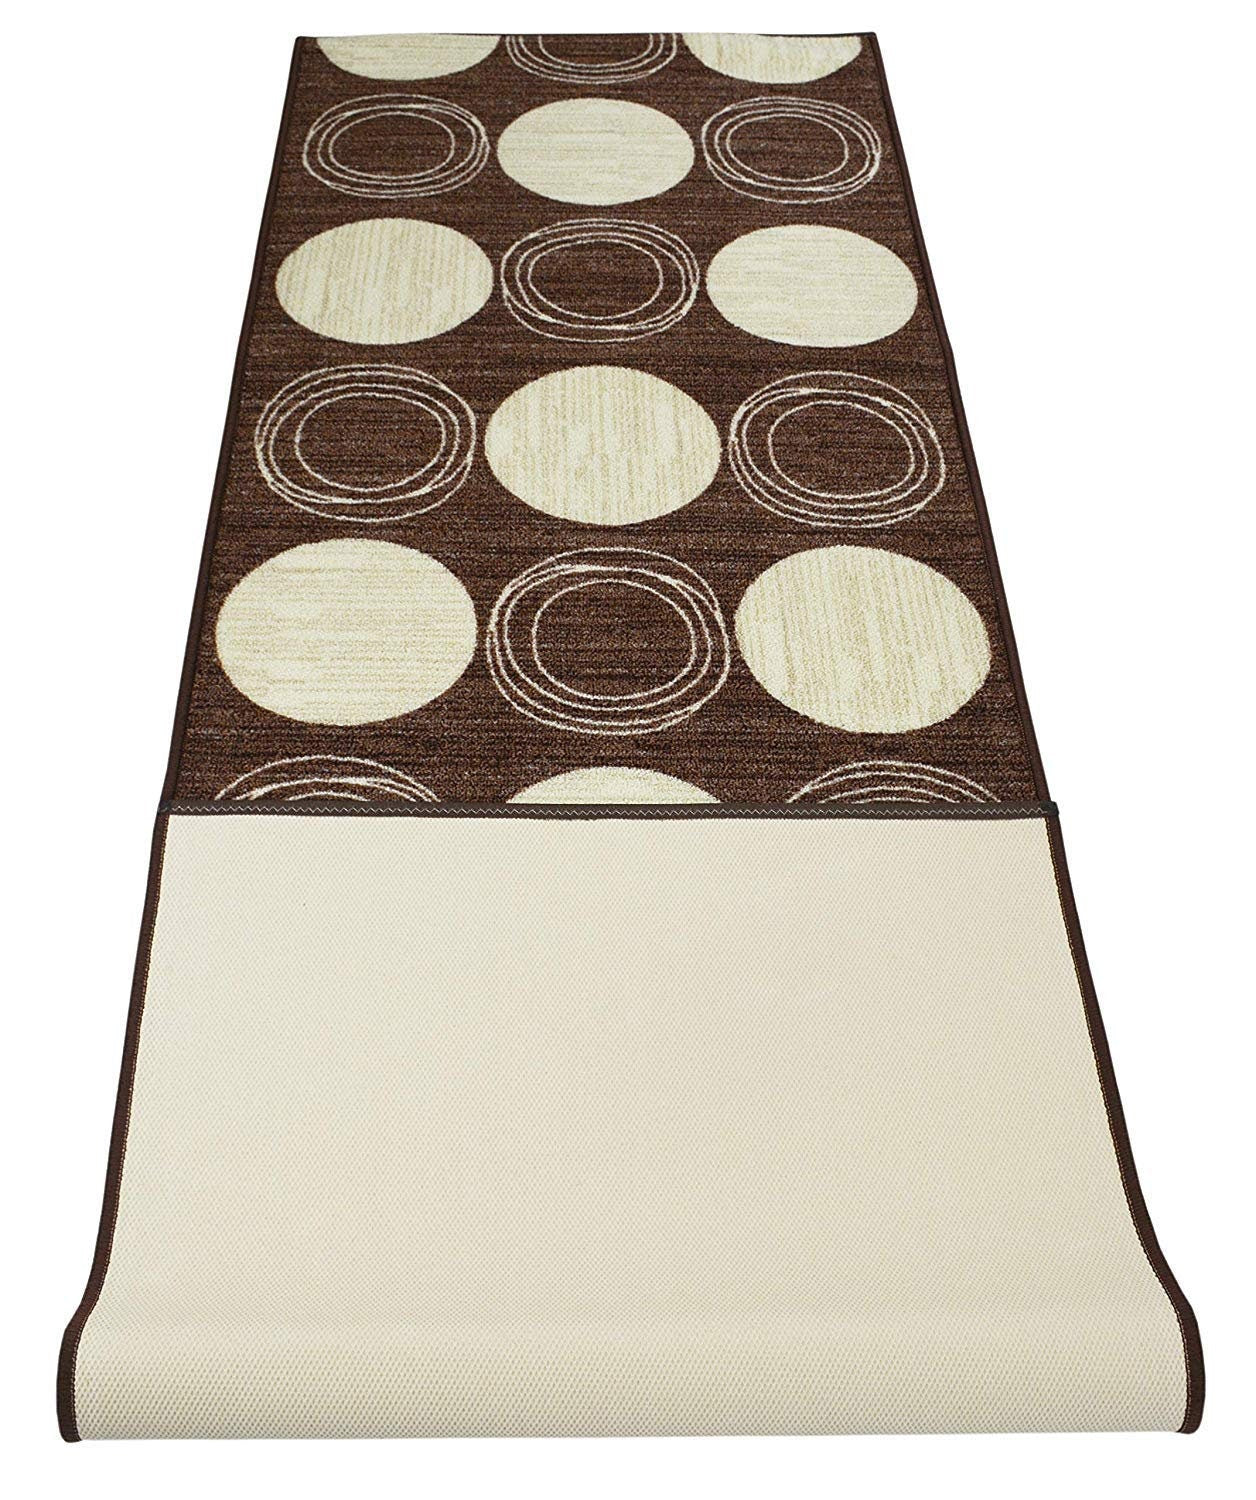 Custom Size Runner Rug Circles Geometric Abstract Brown Cream Skid Resistant Runner Rug Cut To Size Non Slip Runner Rug Customize By Feet